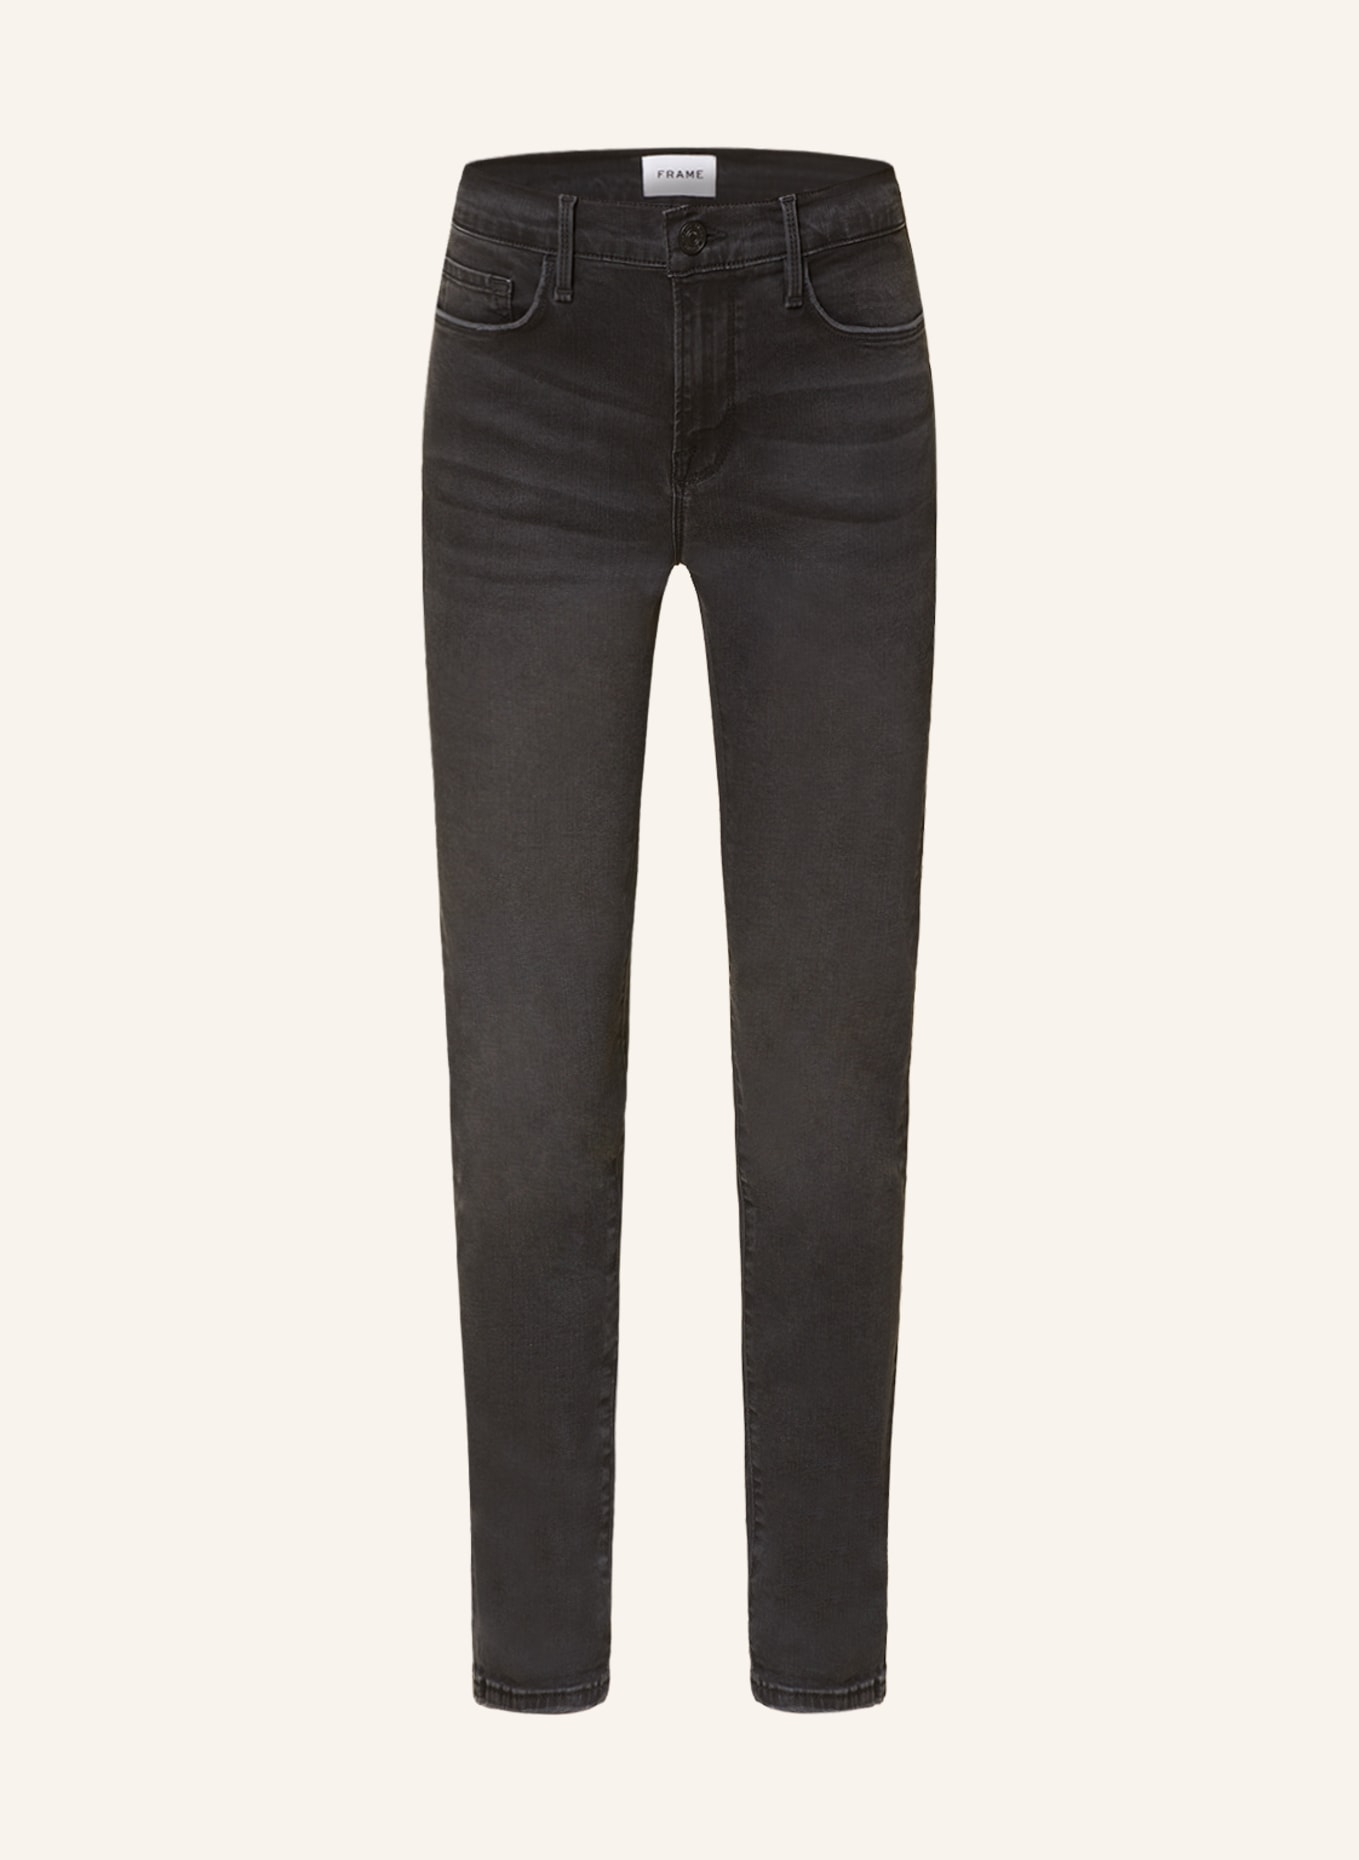 FRAME Skinny Jeans LE GARCON, Farbe: KRRY KERRY (Bild 1)